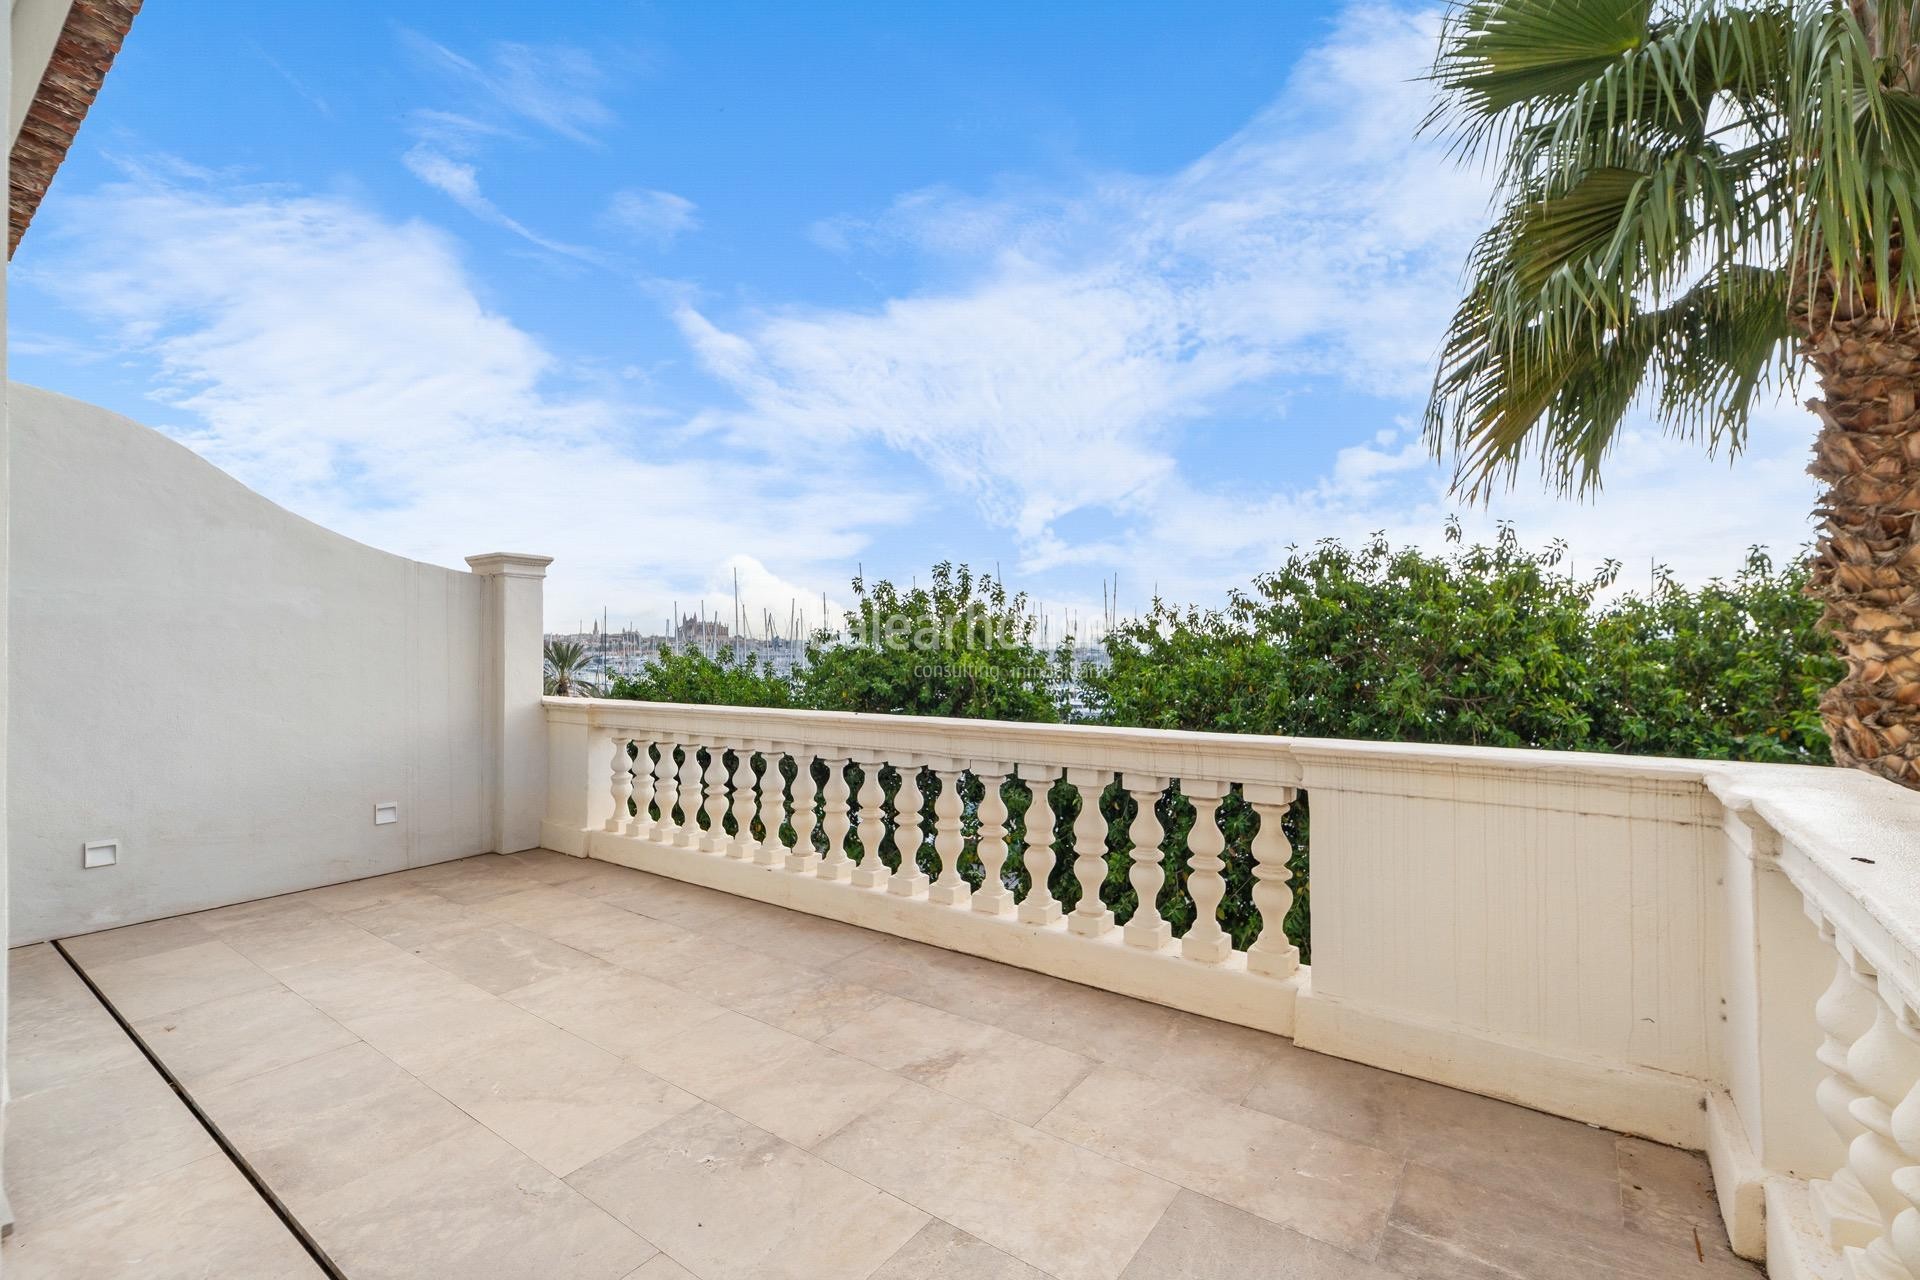 Excellent refurbished flat on the seafront of the Paseo Marítimo with modern spaces and sea views.